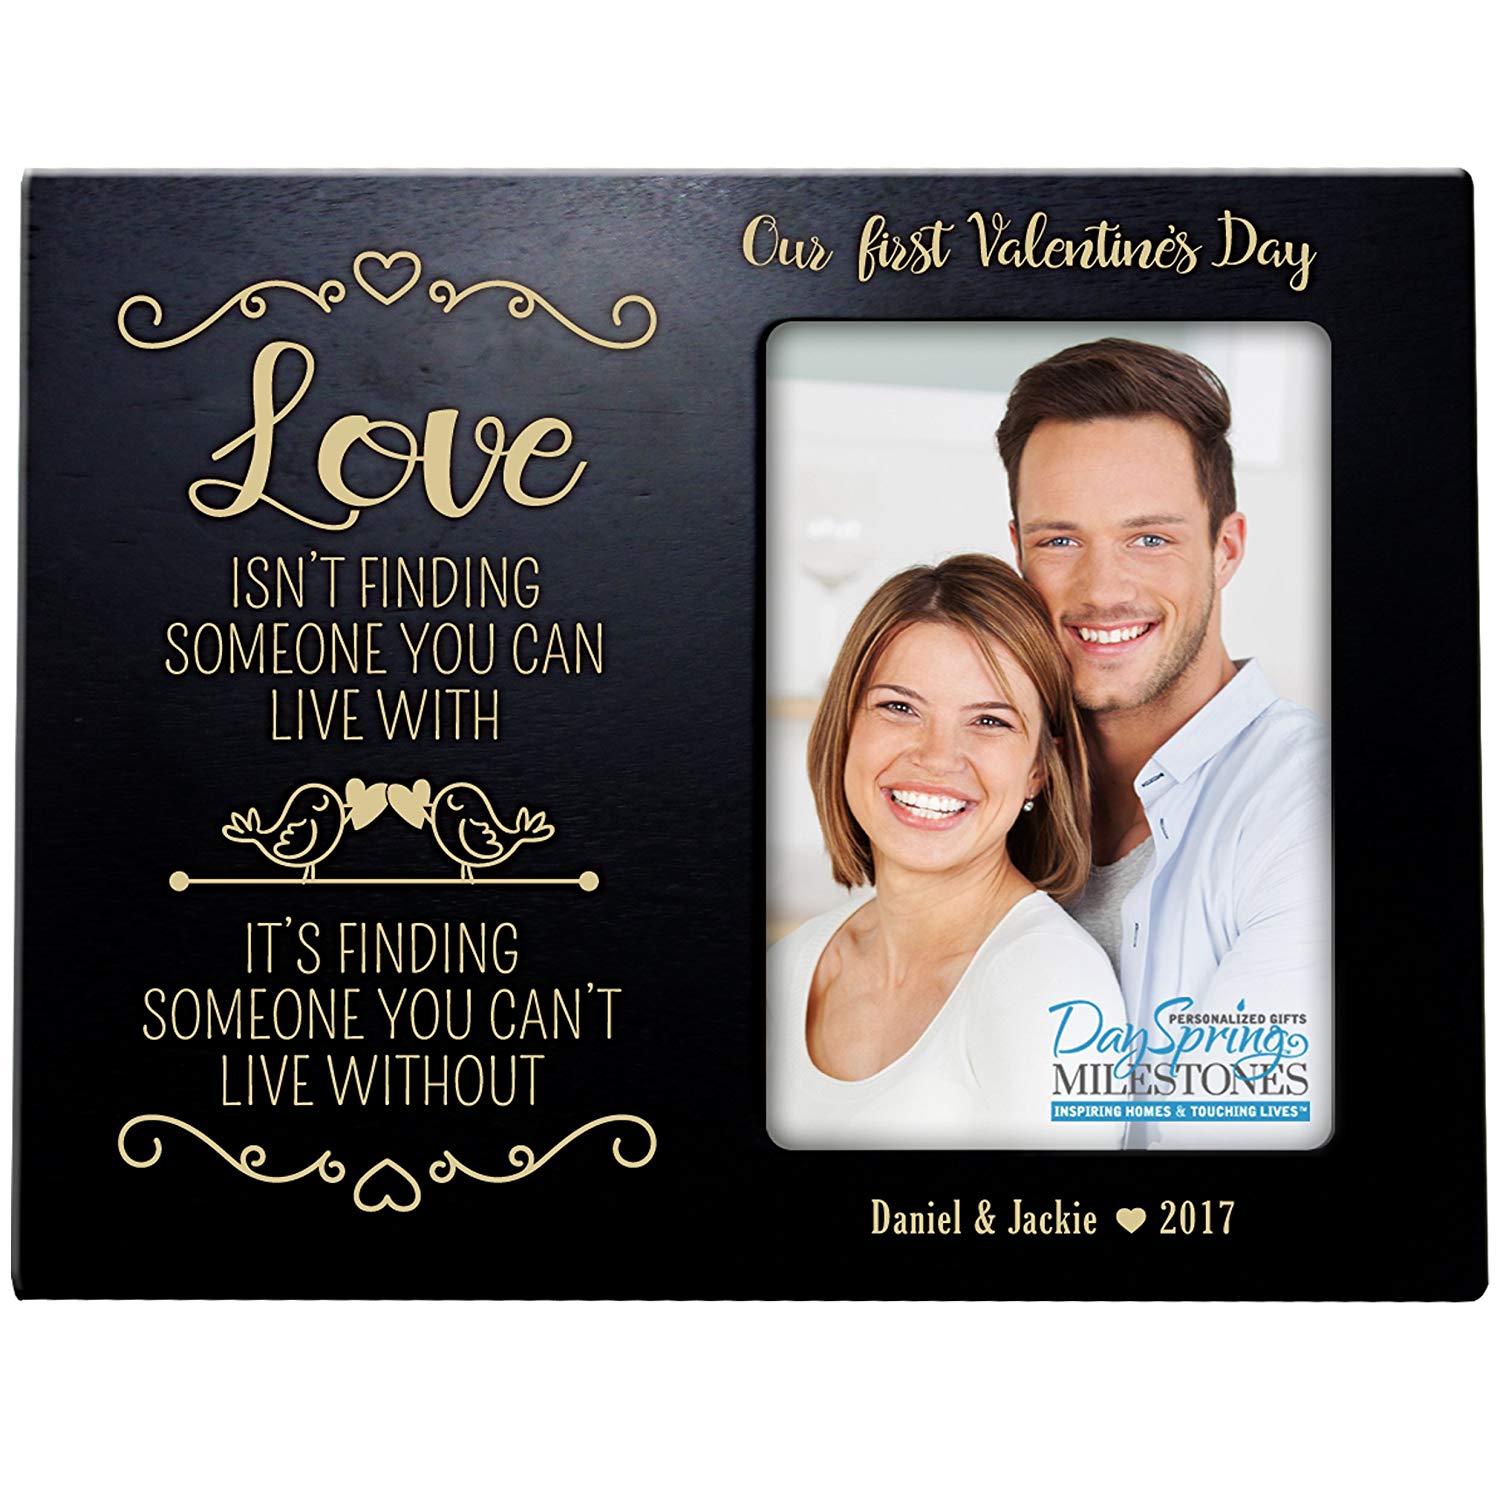 Personalized Valentine's Day Frames - Our First Valentine's Day - LifeSong Milestones